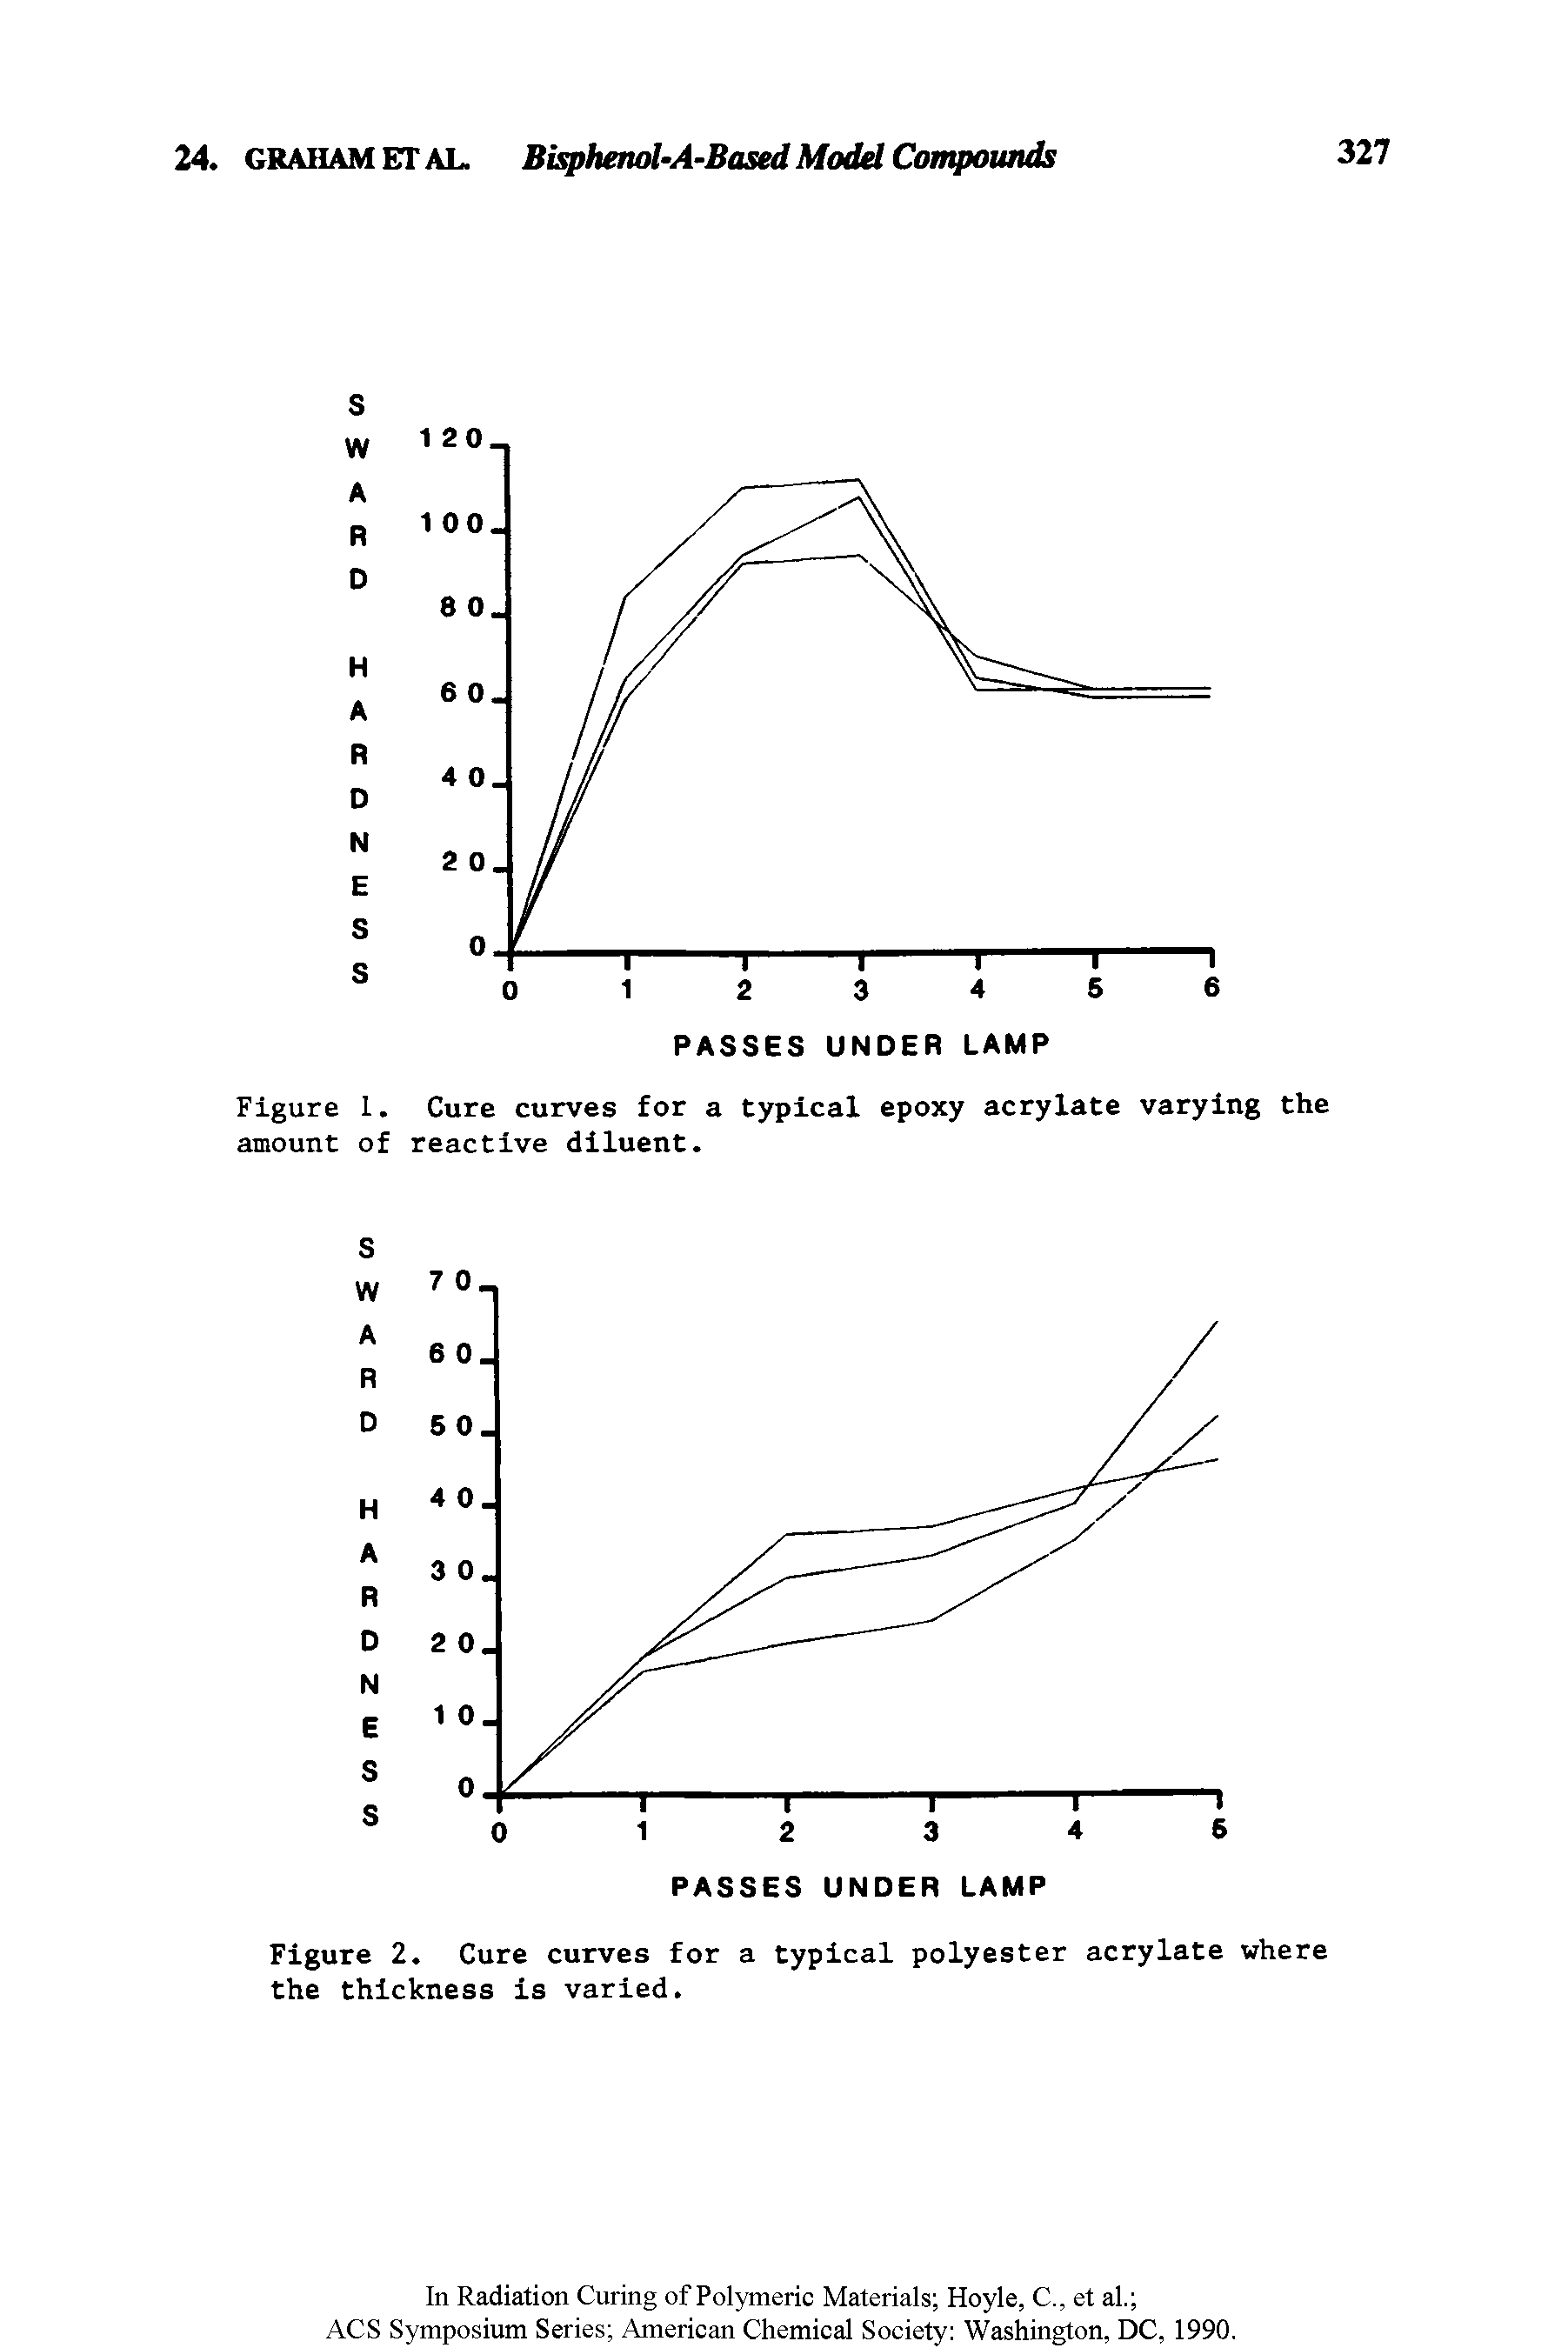 Figure 1. Cure curves for a typical epoxy acrylate varying the amount of reactive diluent.